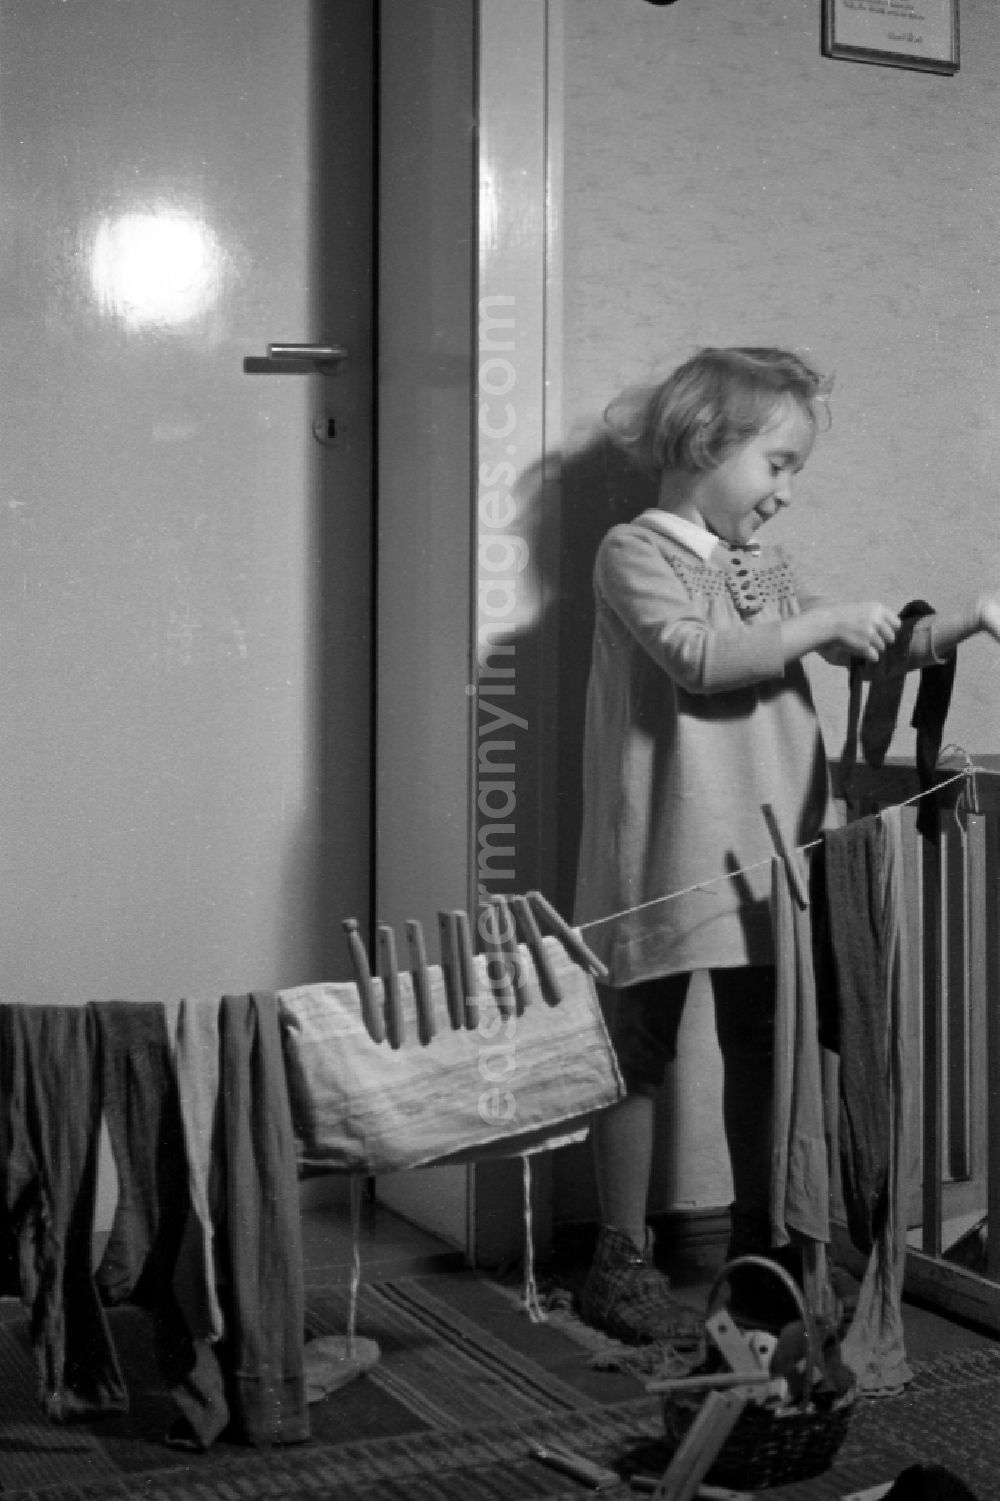 GDR photo archive: Merseburg - A small girl plays laundry hang up in Merseburg in the federal state Saxony-Anhalt in Germany